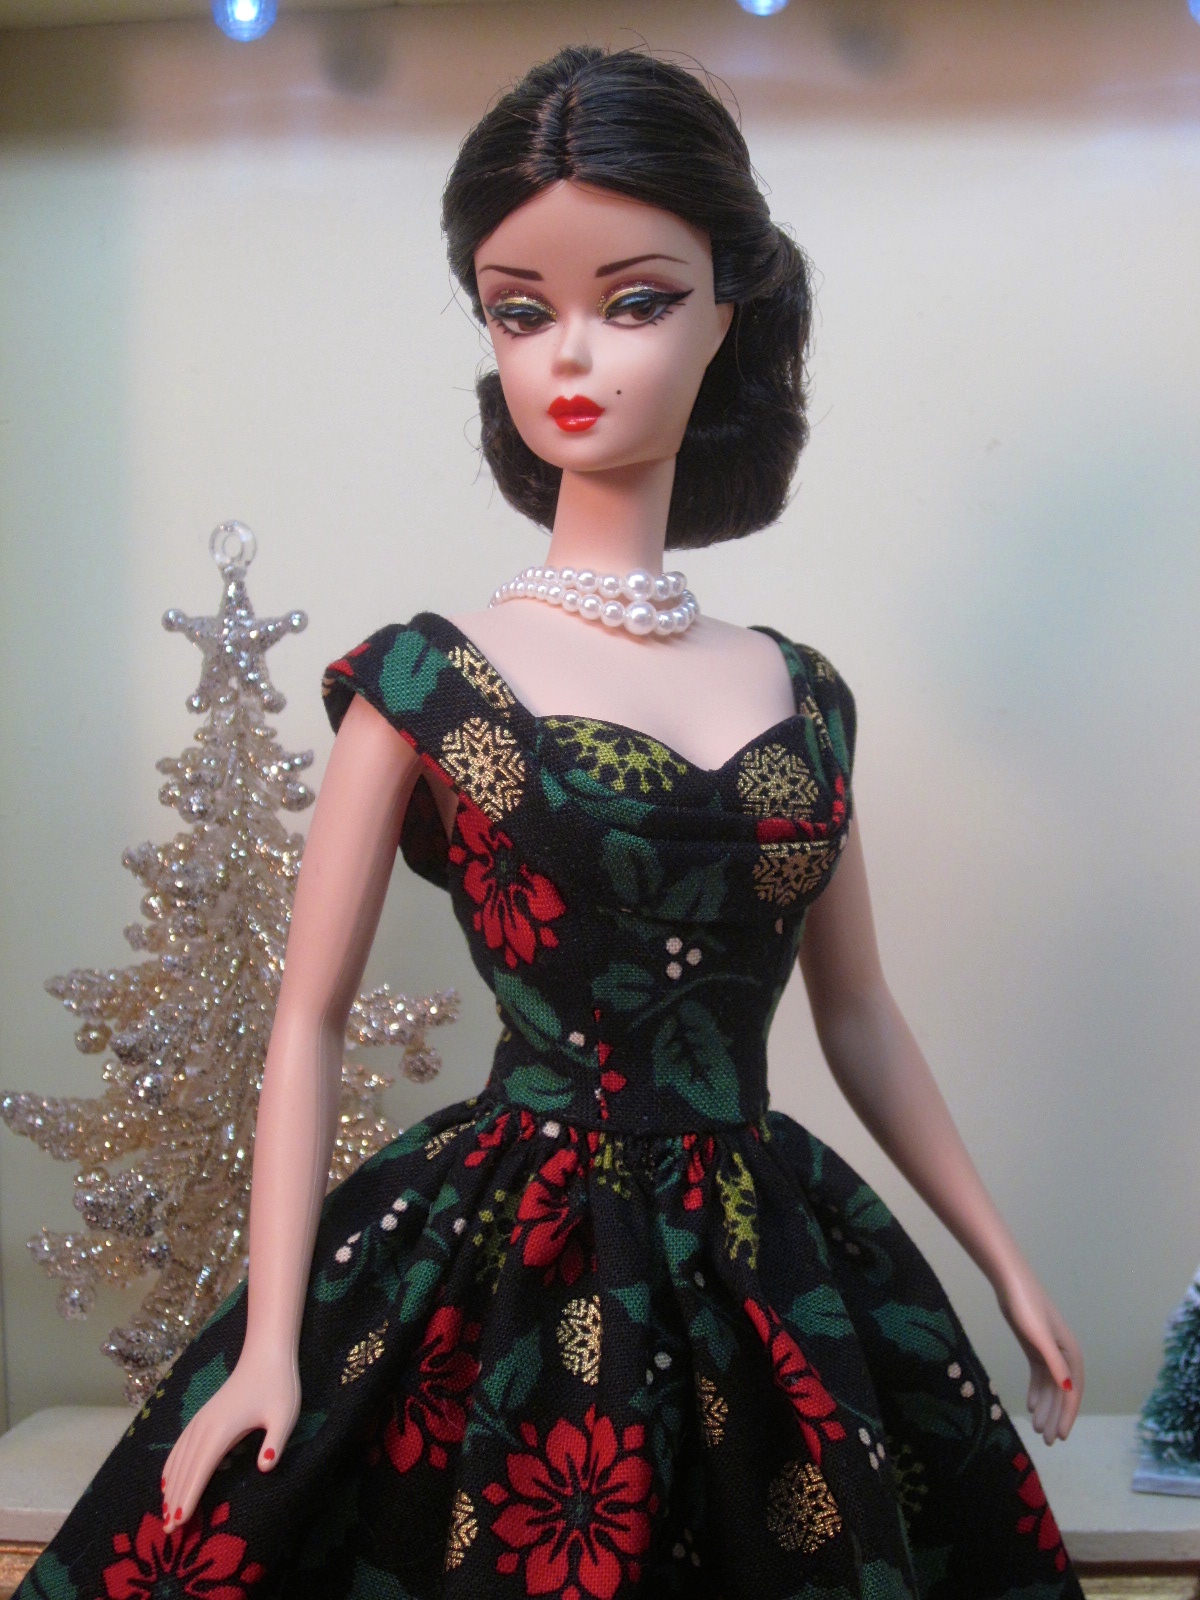 Holiday Rockabilly Dress in Poinsettia | bellissimacouturefashions